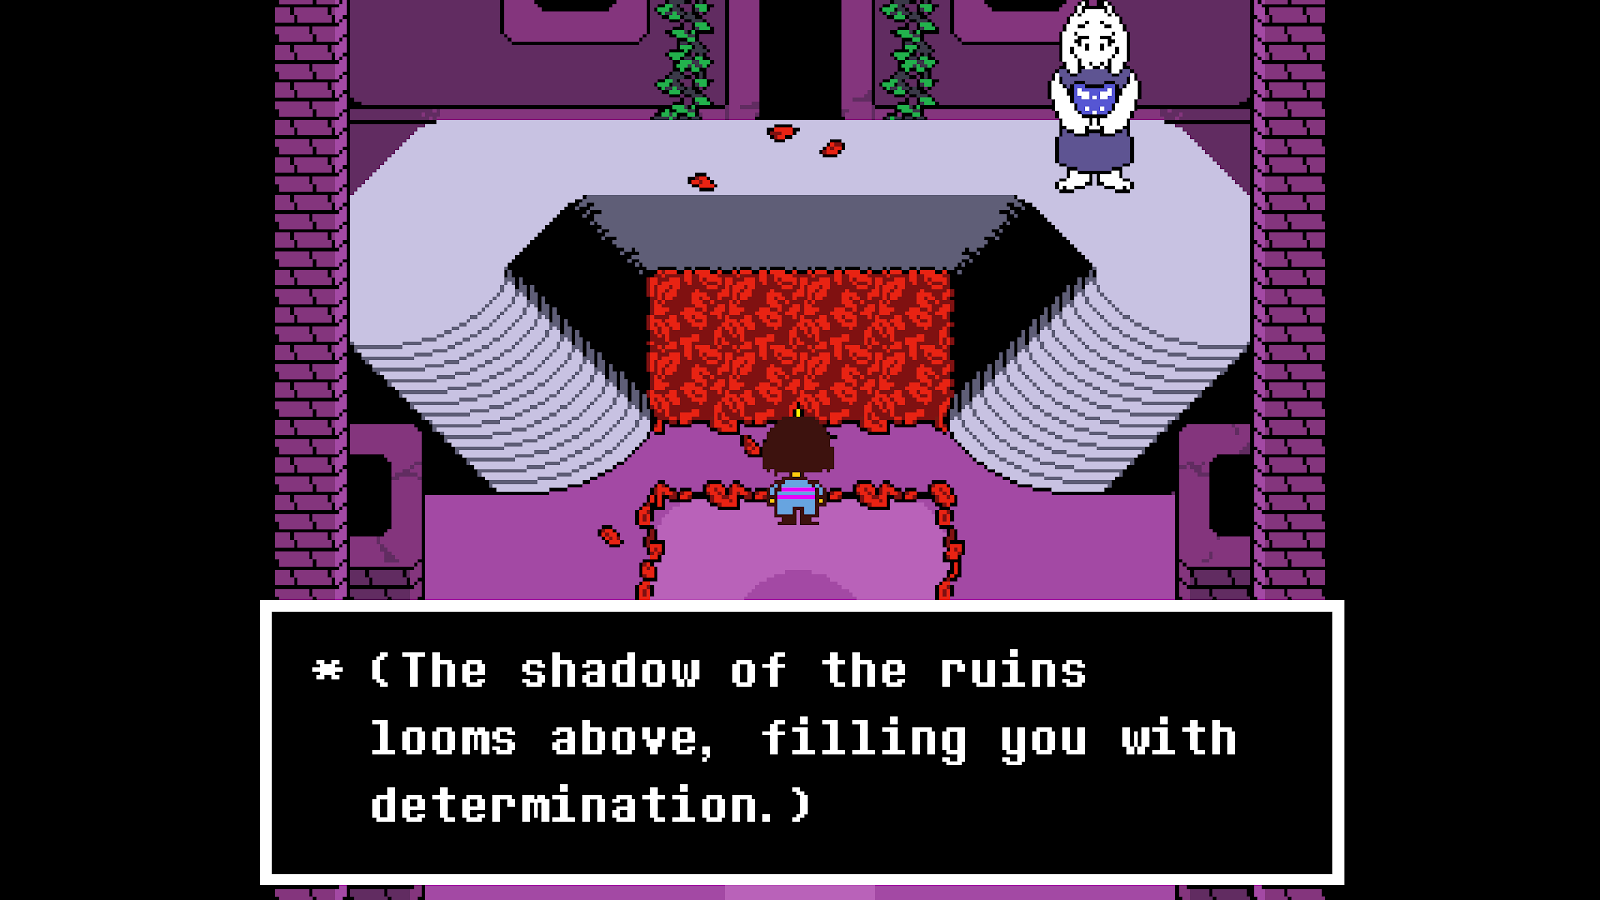 How 'Undertale' Subverts Expectations - Epilogue Gaming